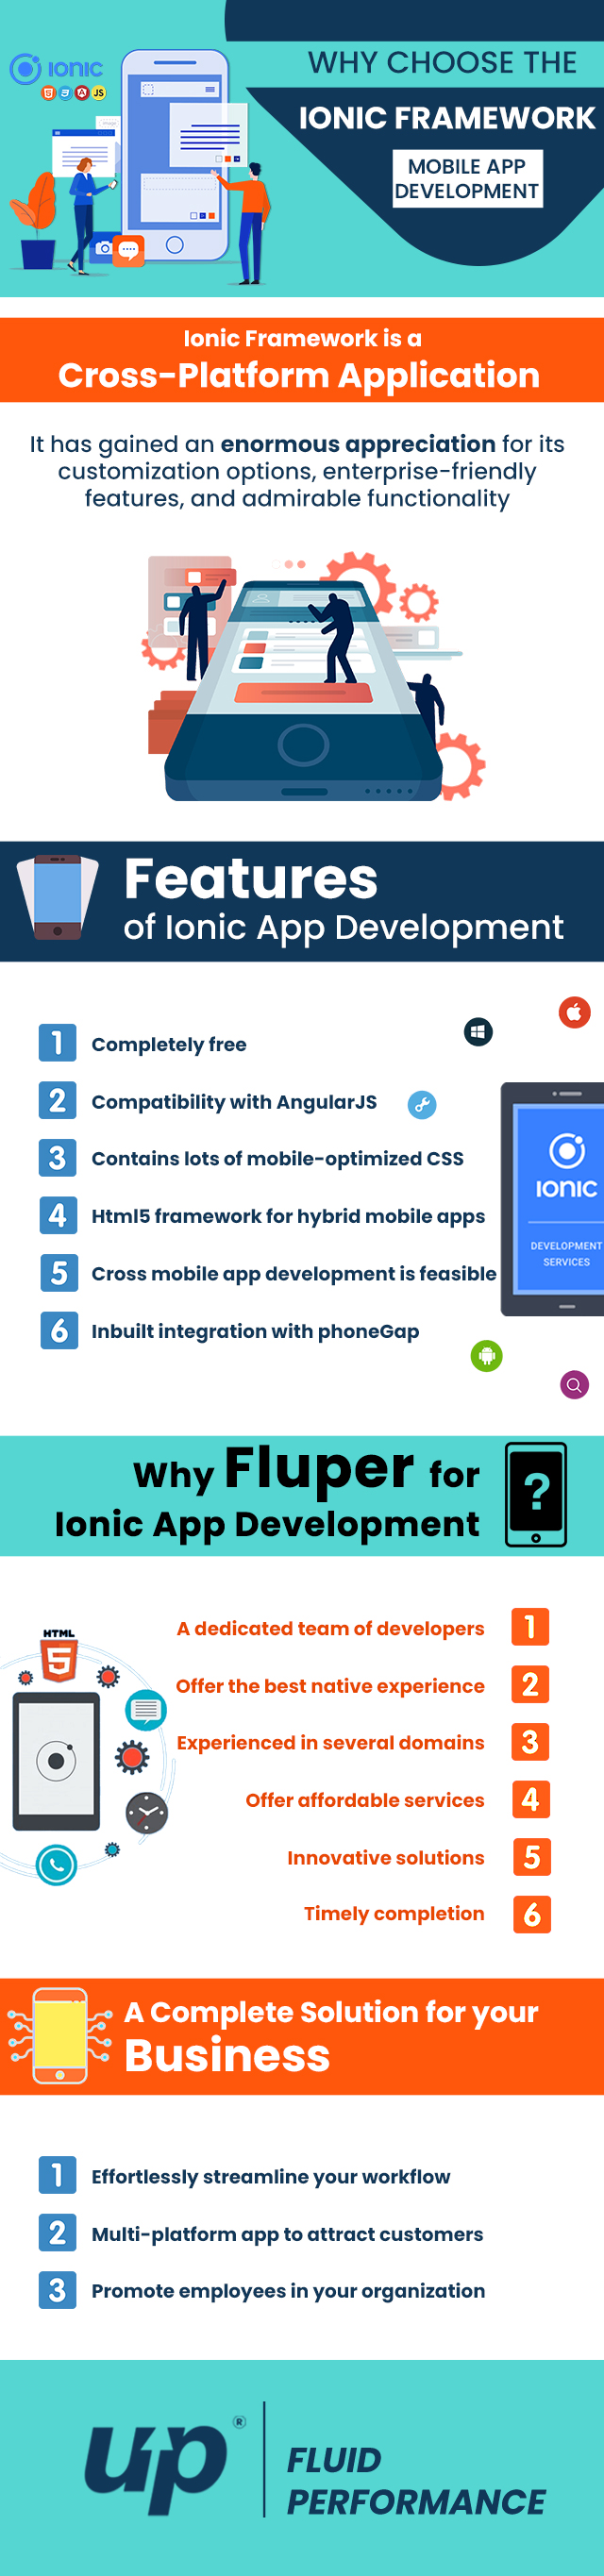 Why choose the Ionic framework for mobile App Development Infographic?